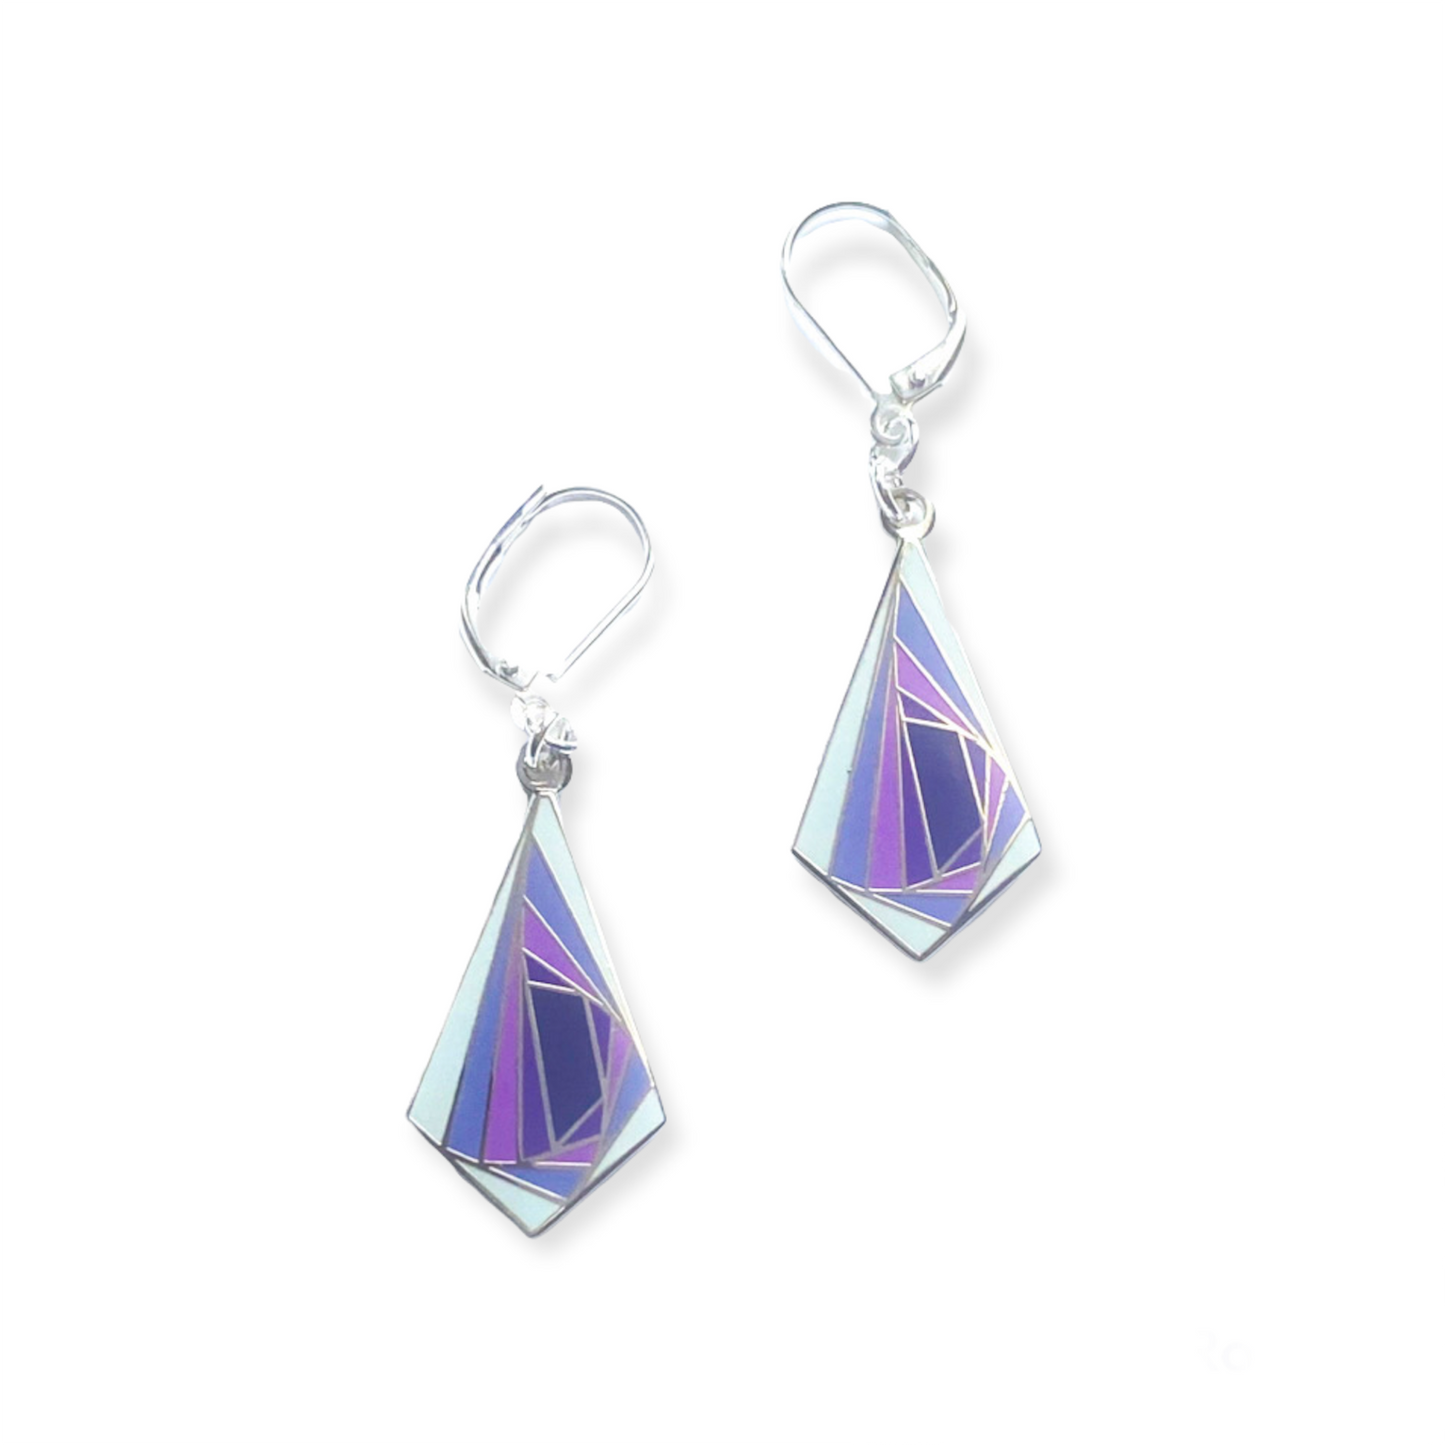 Diamond shaped purple enamel earrings with repeating shapes in the center